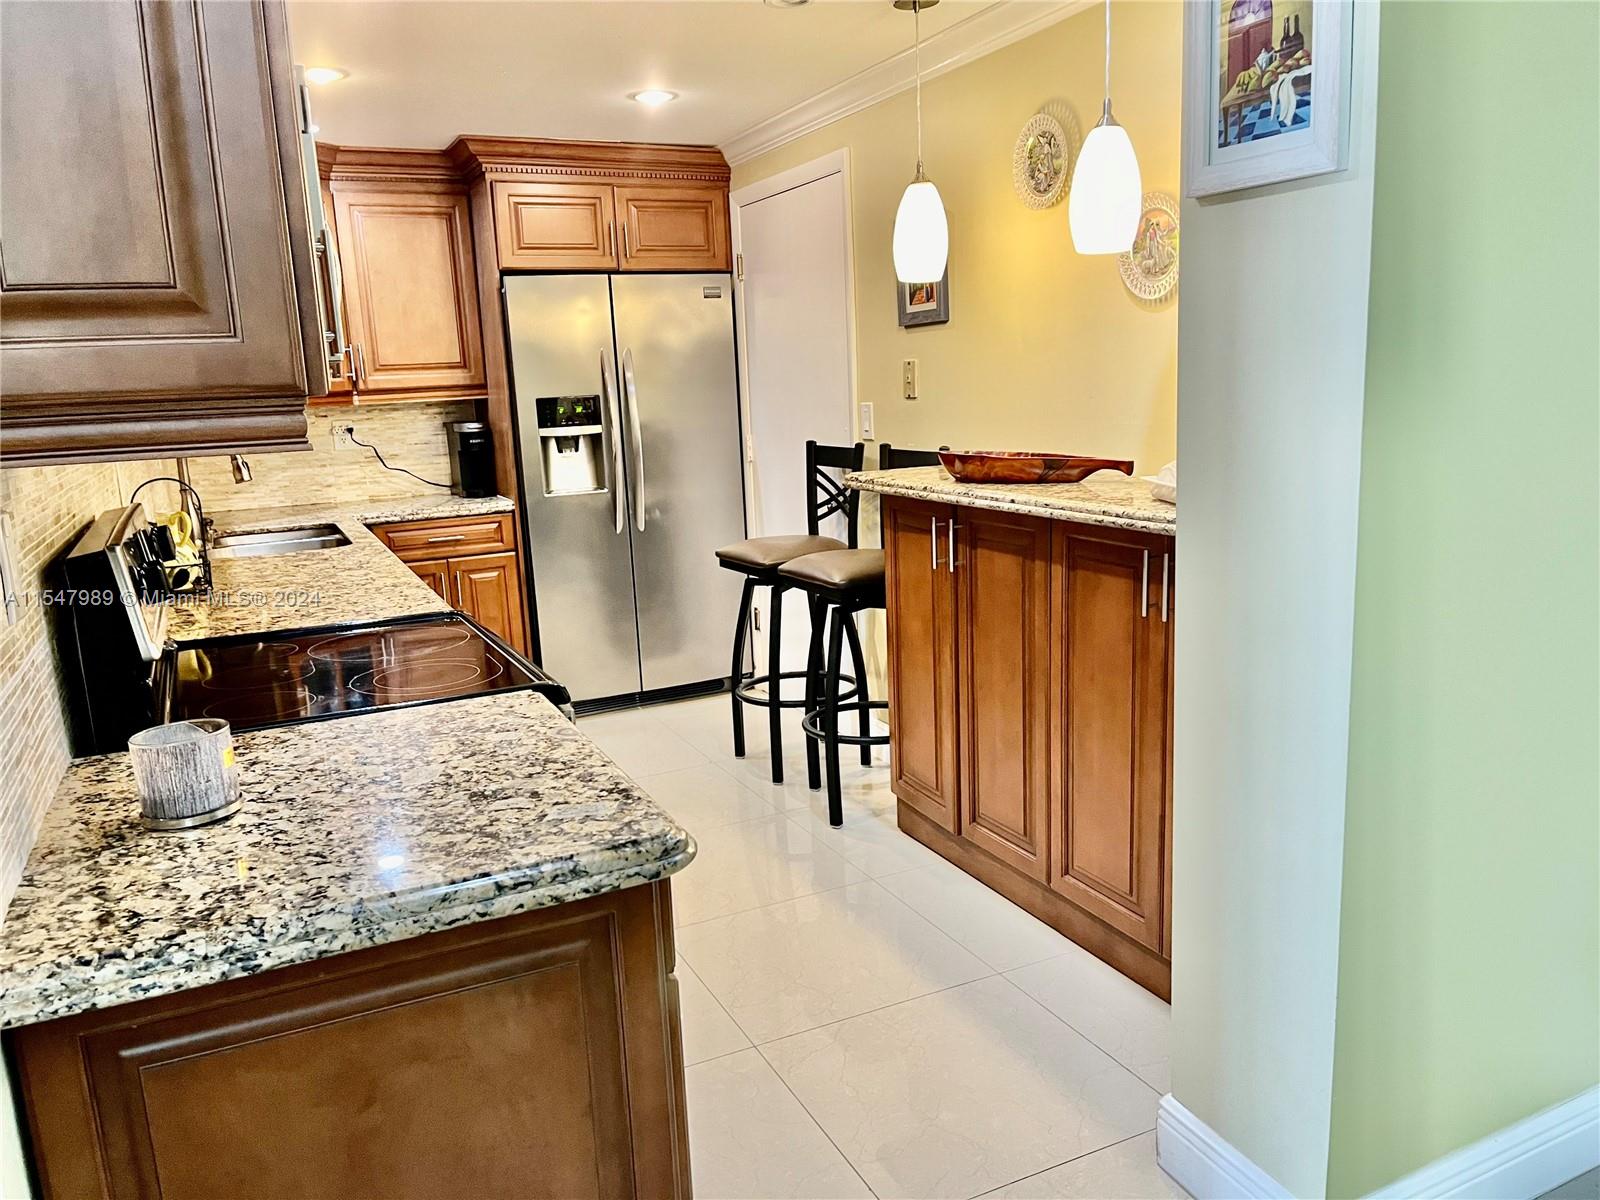 a kitchen with stainless steel appliances granite countertop a sink refrigerator and stove